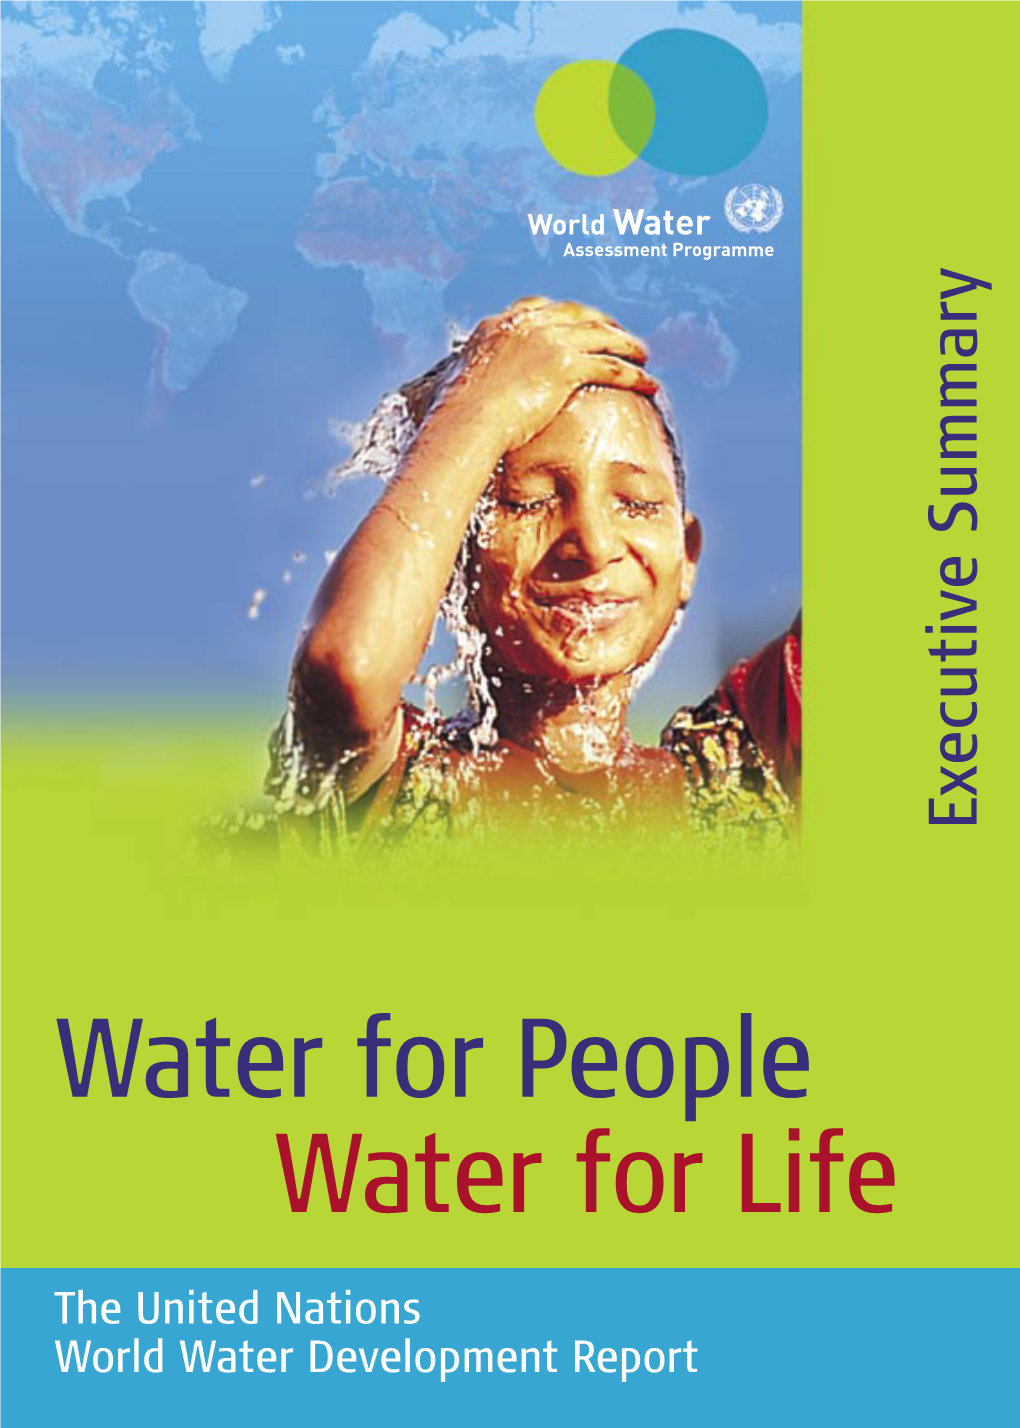 Water for People, Water for Life: the United Nations World Water